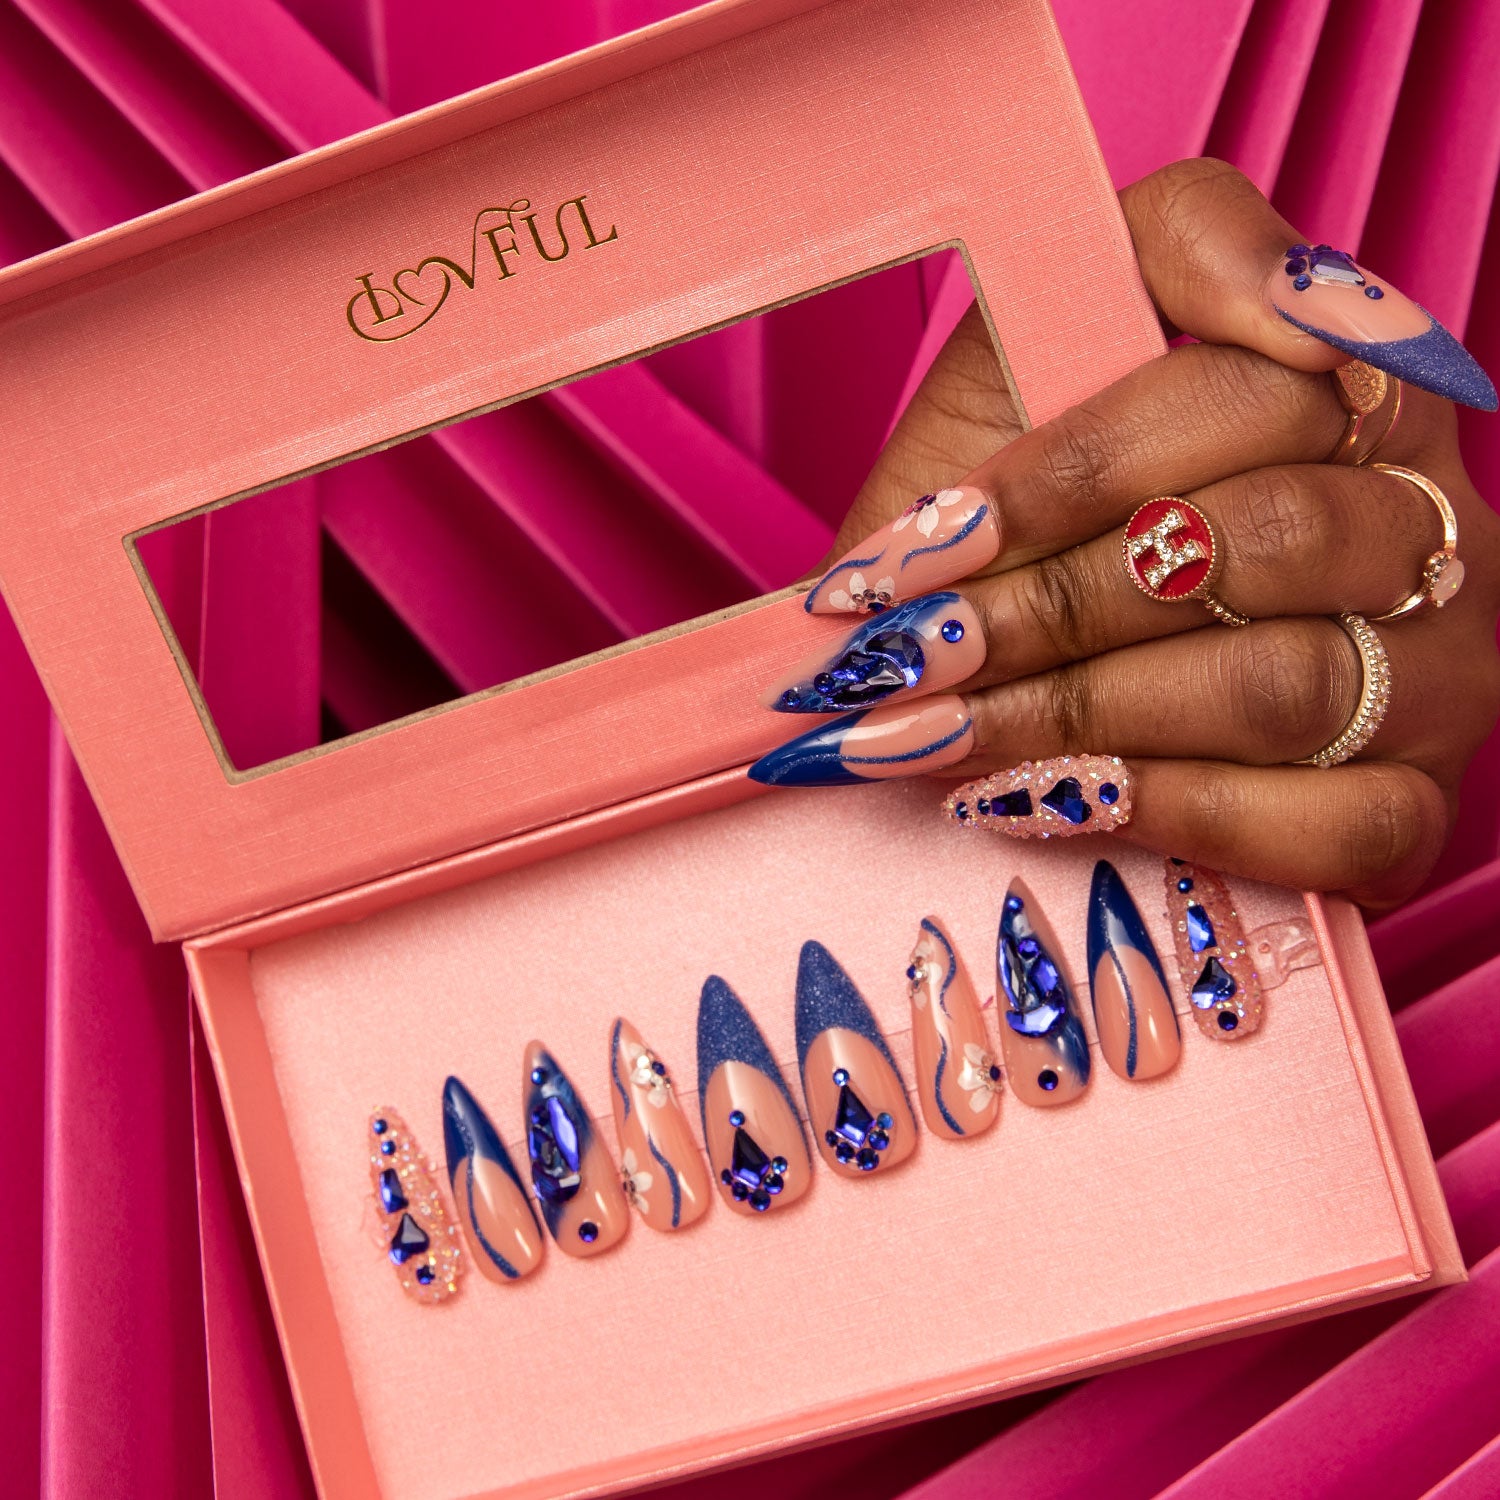 Open pink box displaying 'Blue Suede' press-on acrylic nails with blue French tips, curvy line design, crystal-like decorations, and blue heart-shaped gems. Hand with matching nails holds the box on a pink background.